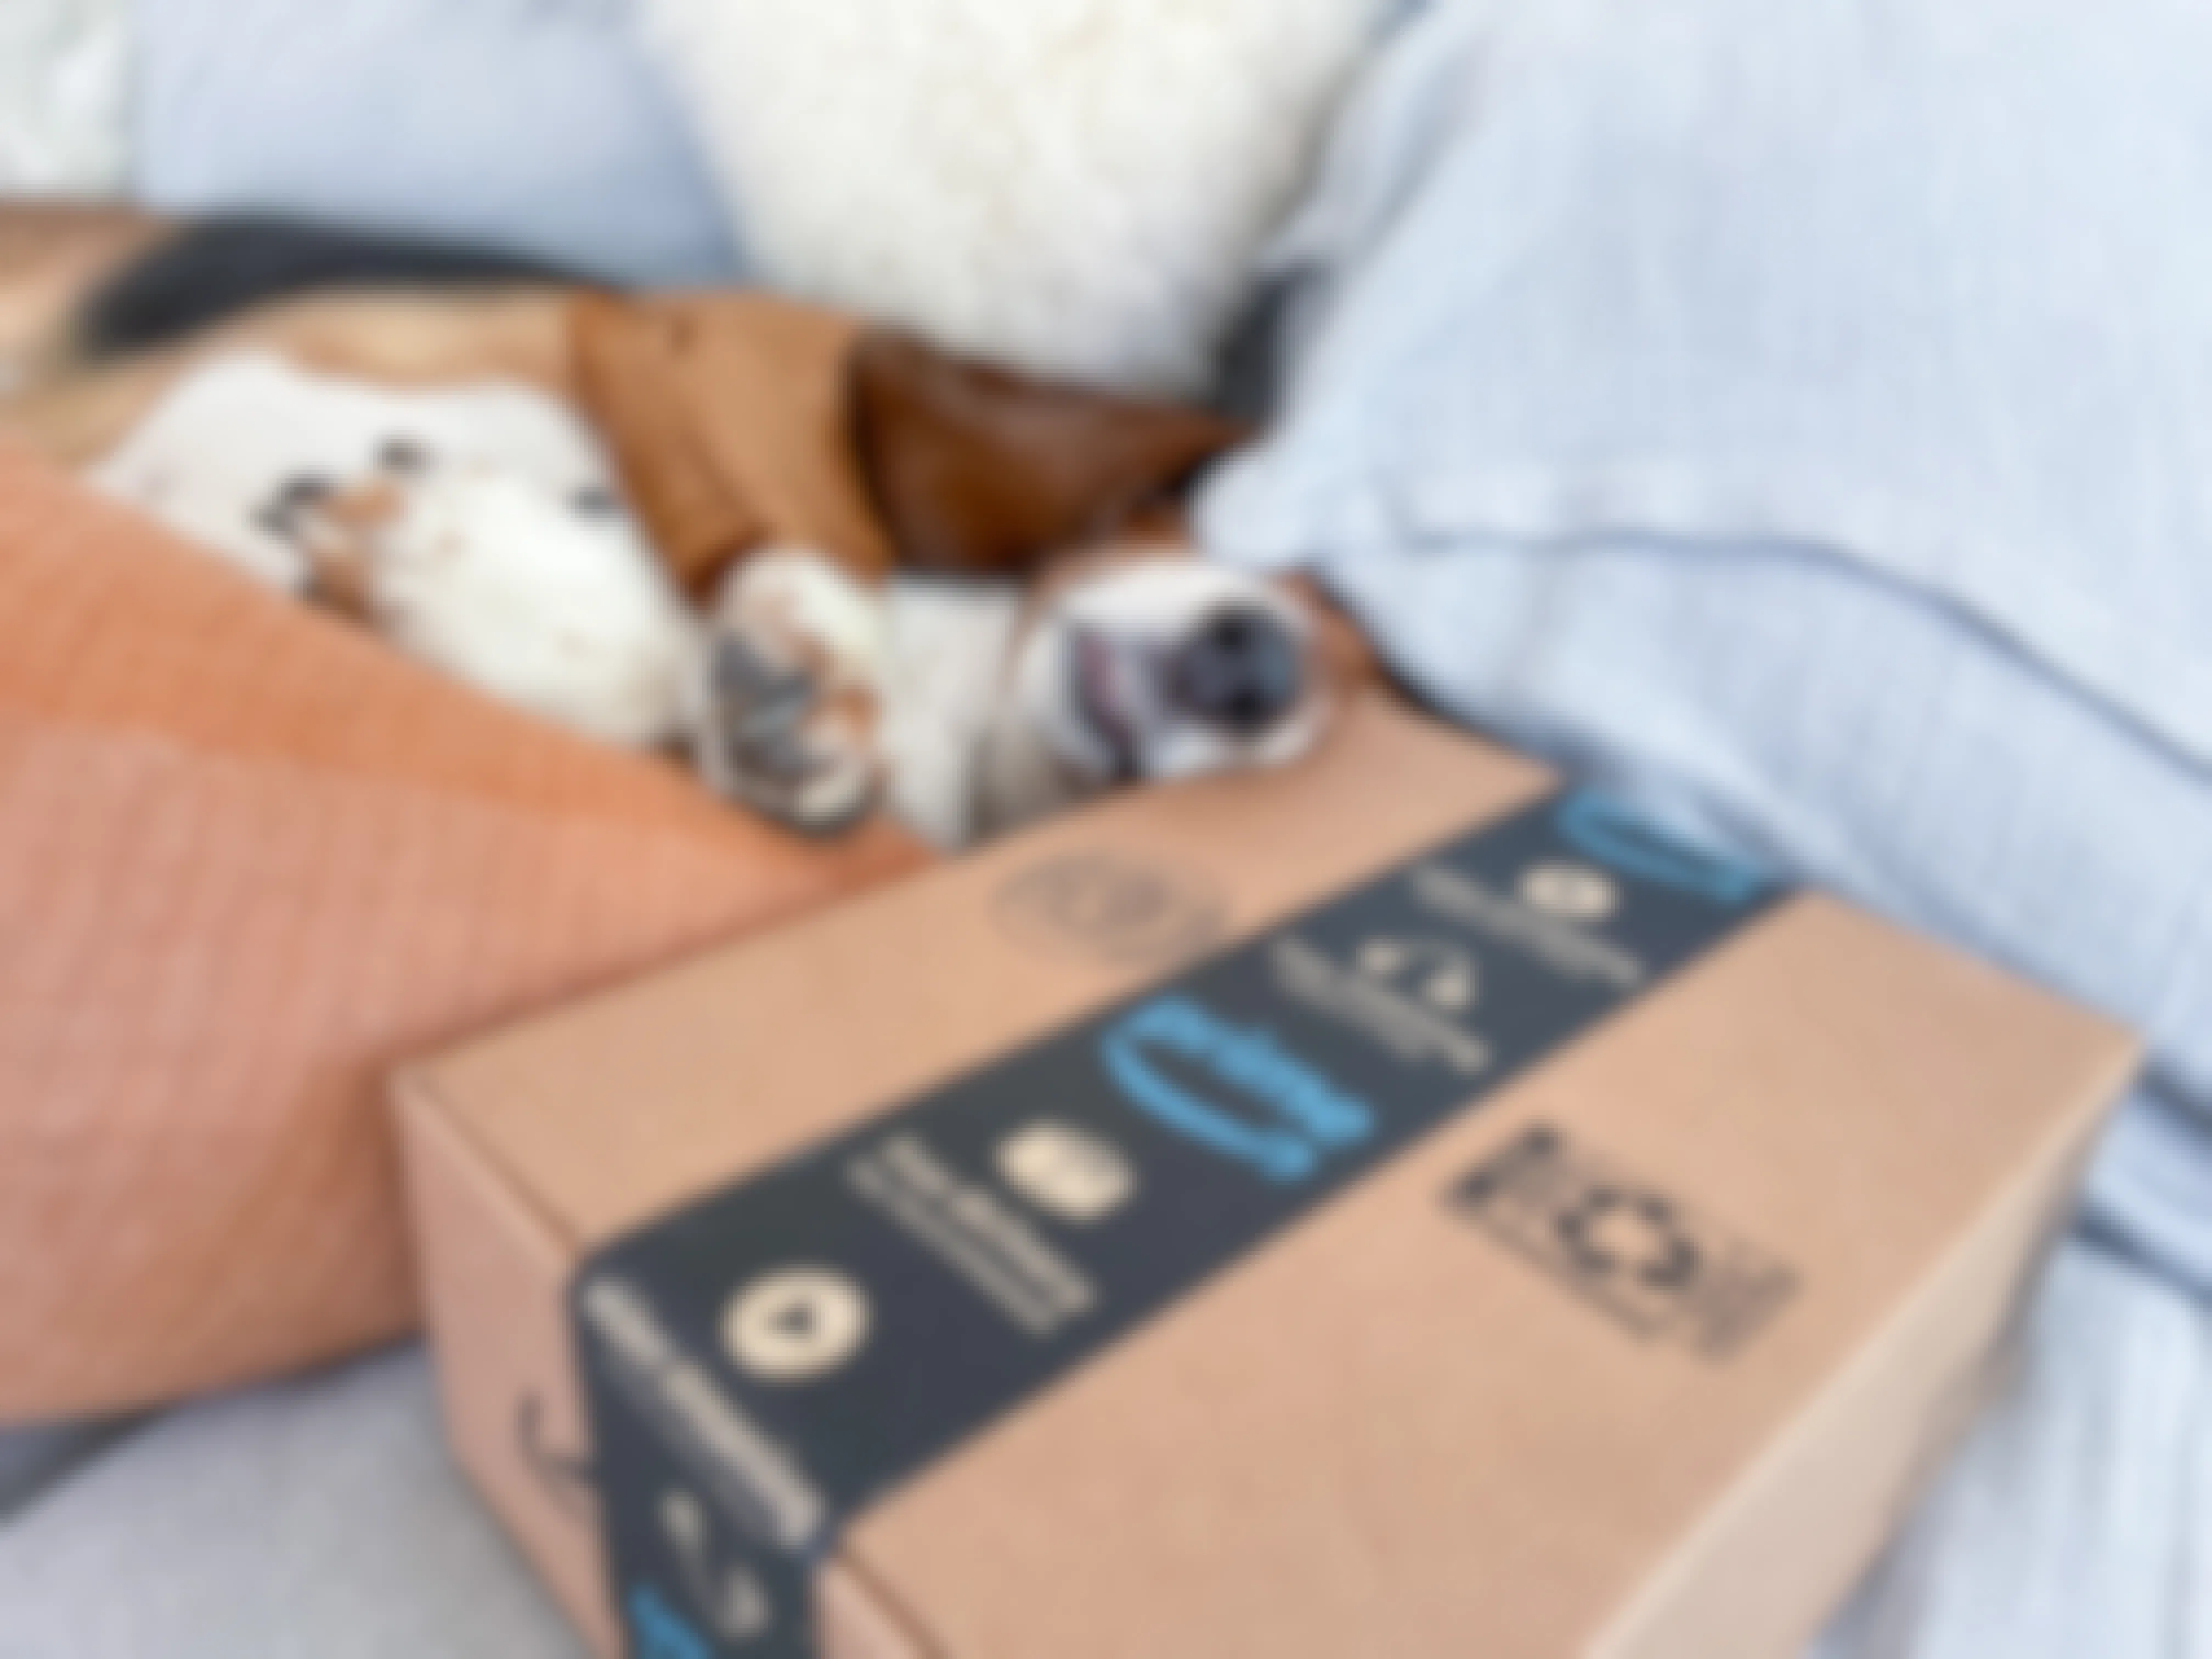 a dog sleeping next to an amazon prime box on a couch